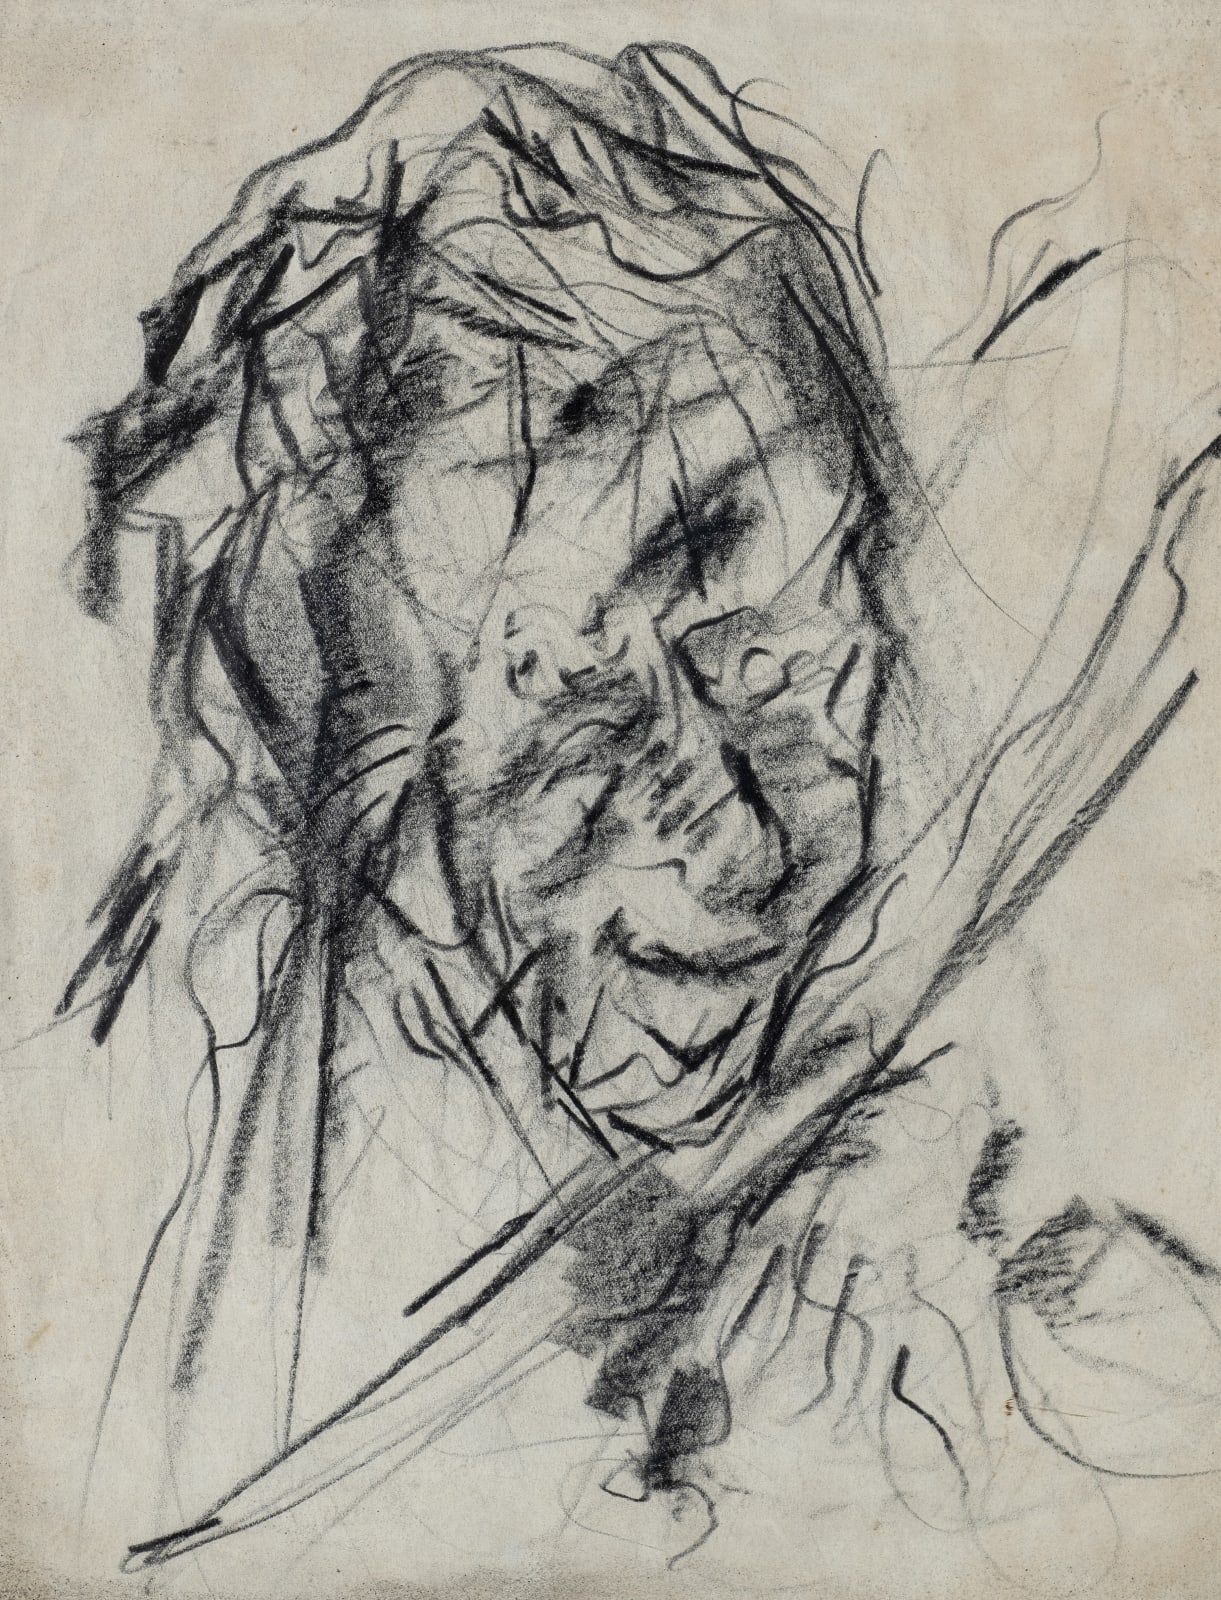 Head of a Man, 1948-49 Pencil on paper 34 x 28cm The Gustav Metzger Foundation